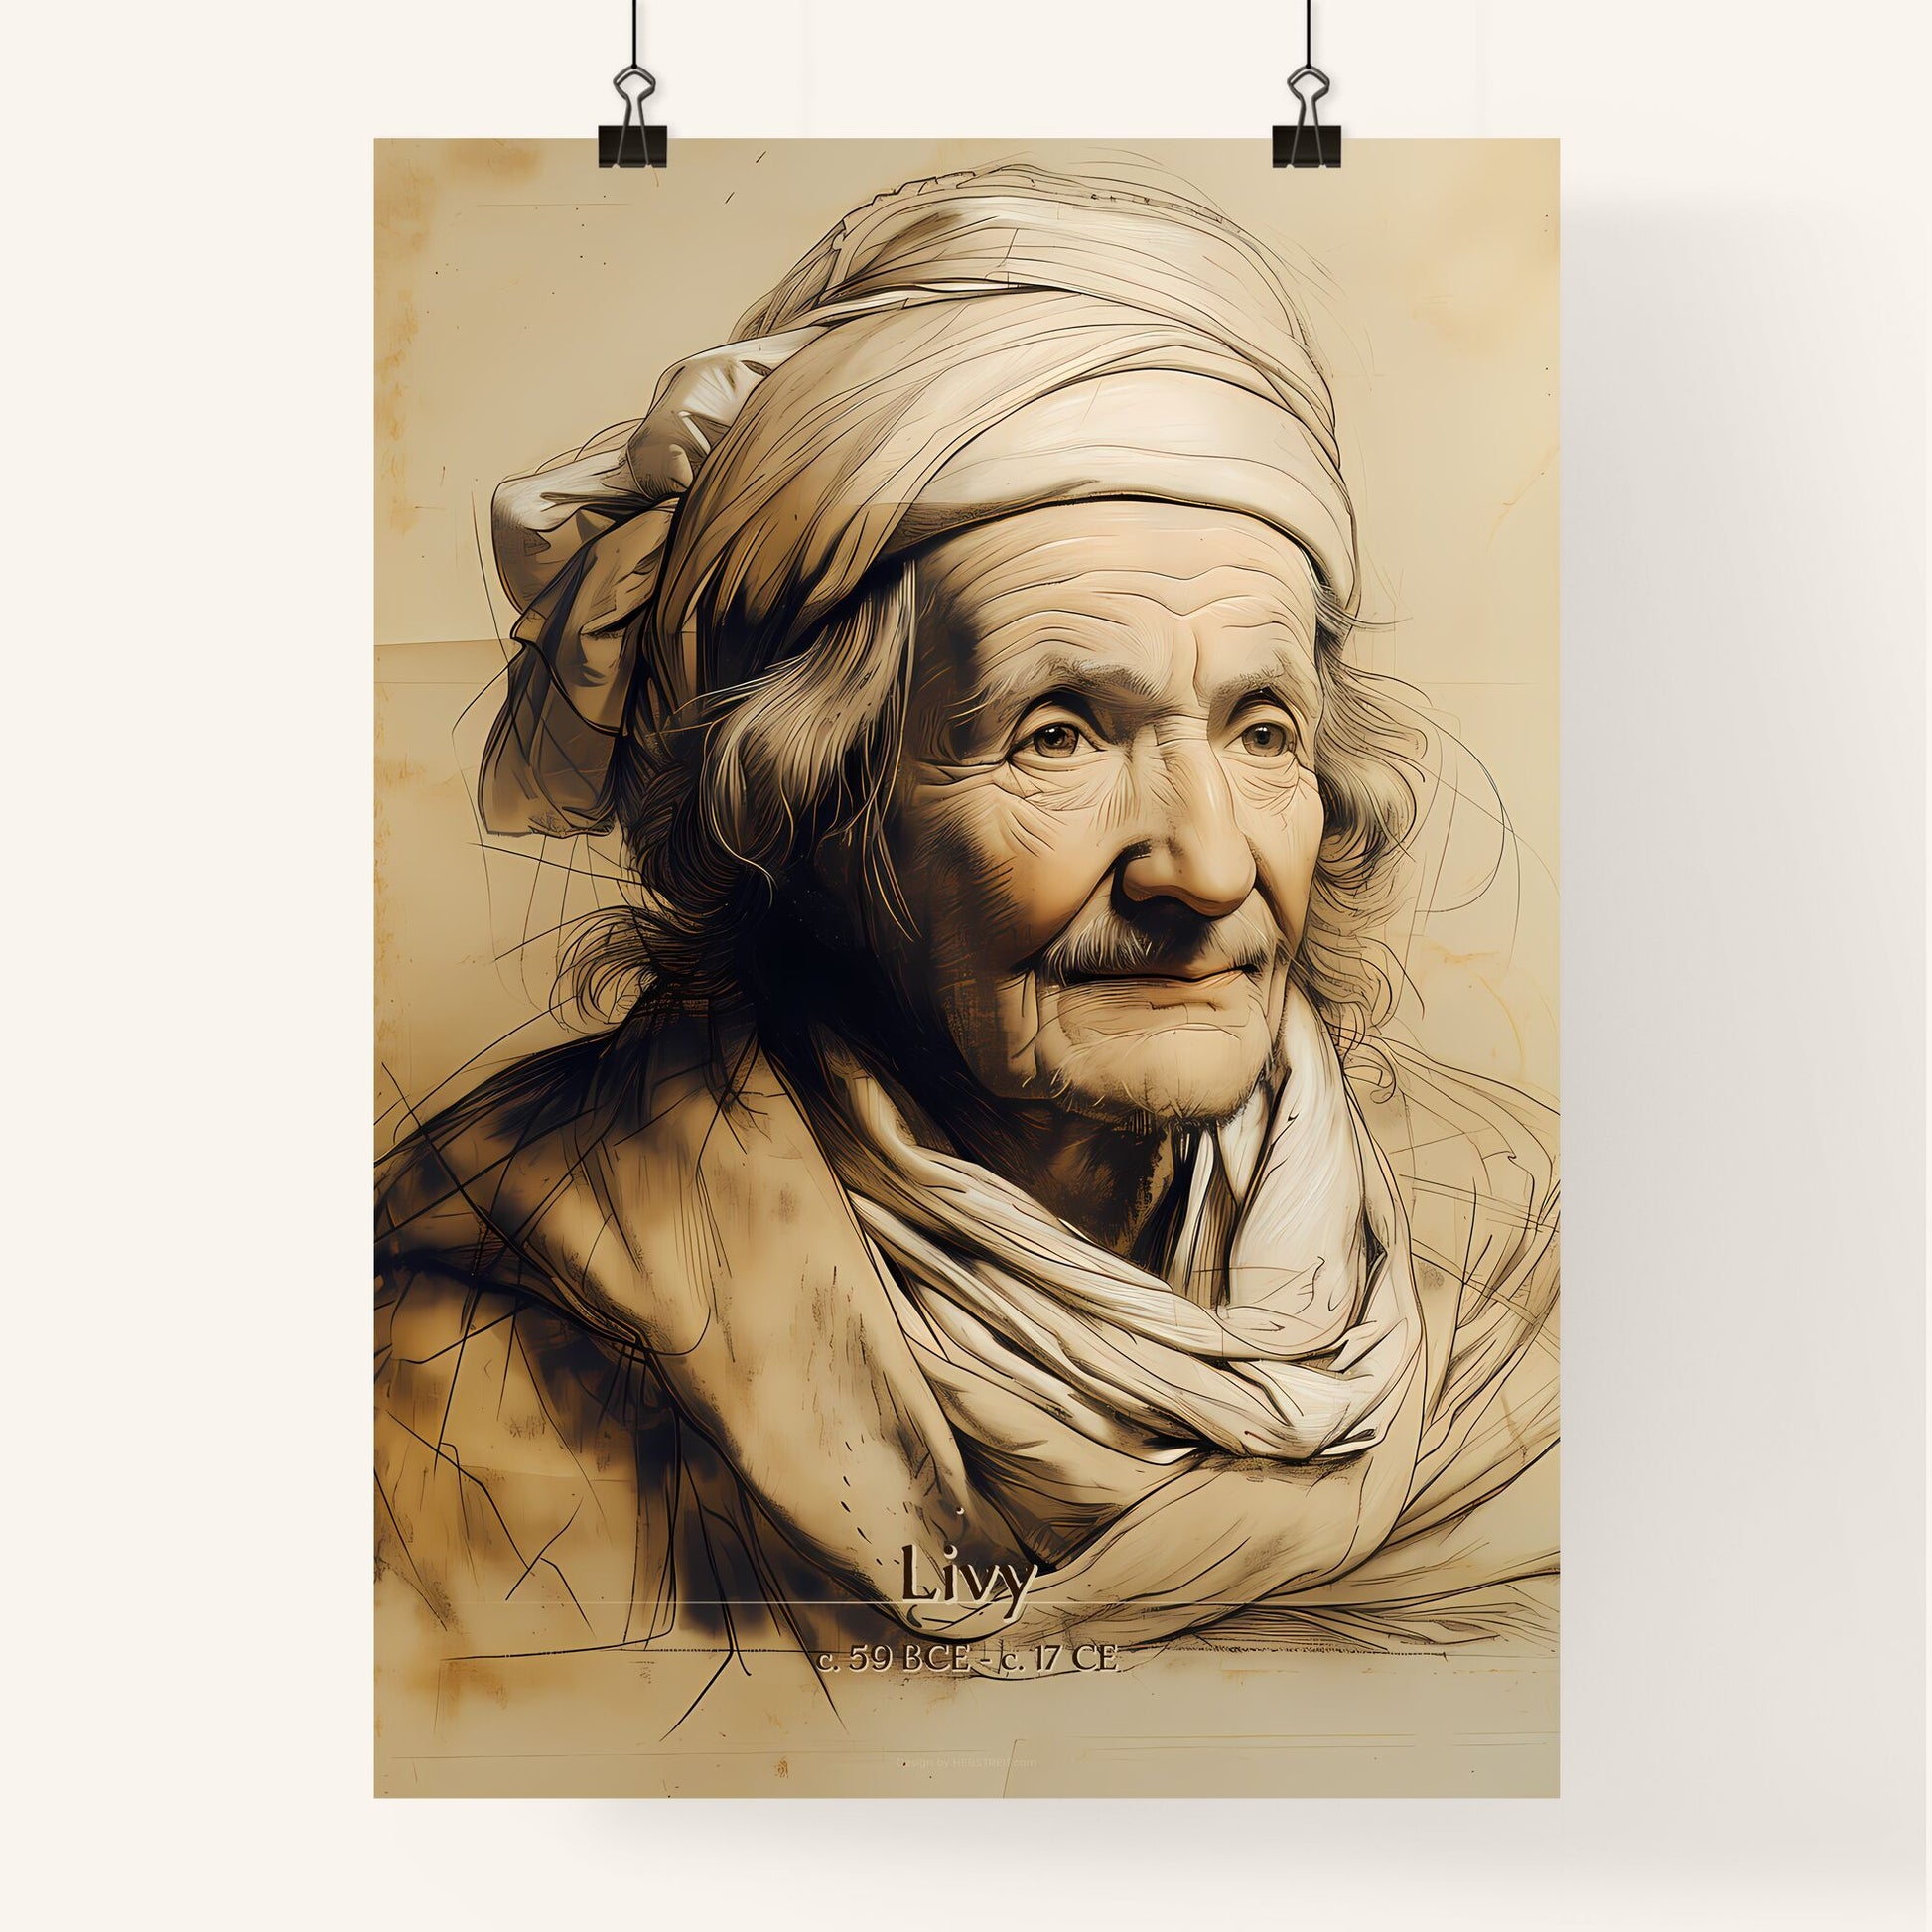 Livy, c. 59 BCE - c. 17 CE, A Poster of a drawing of an old woman Default Title